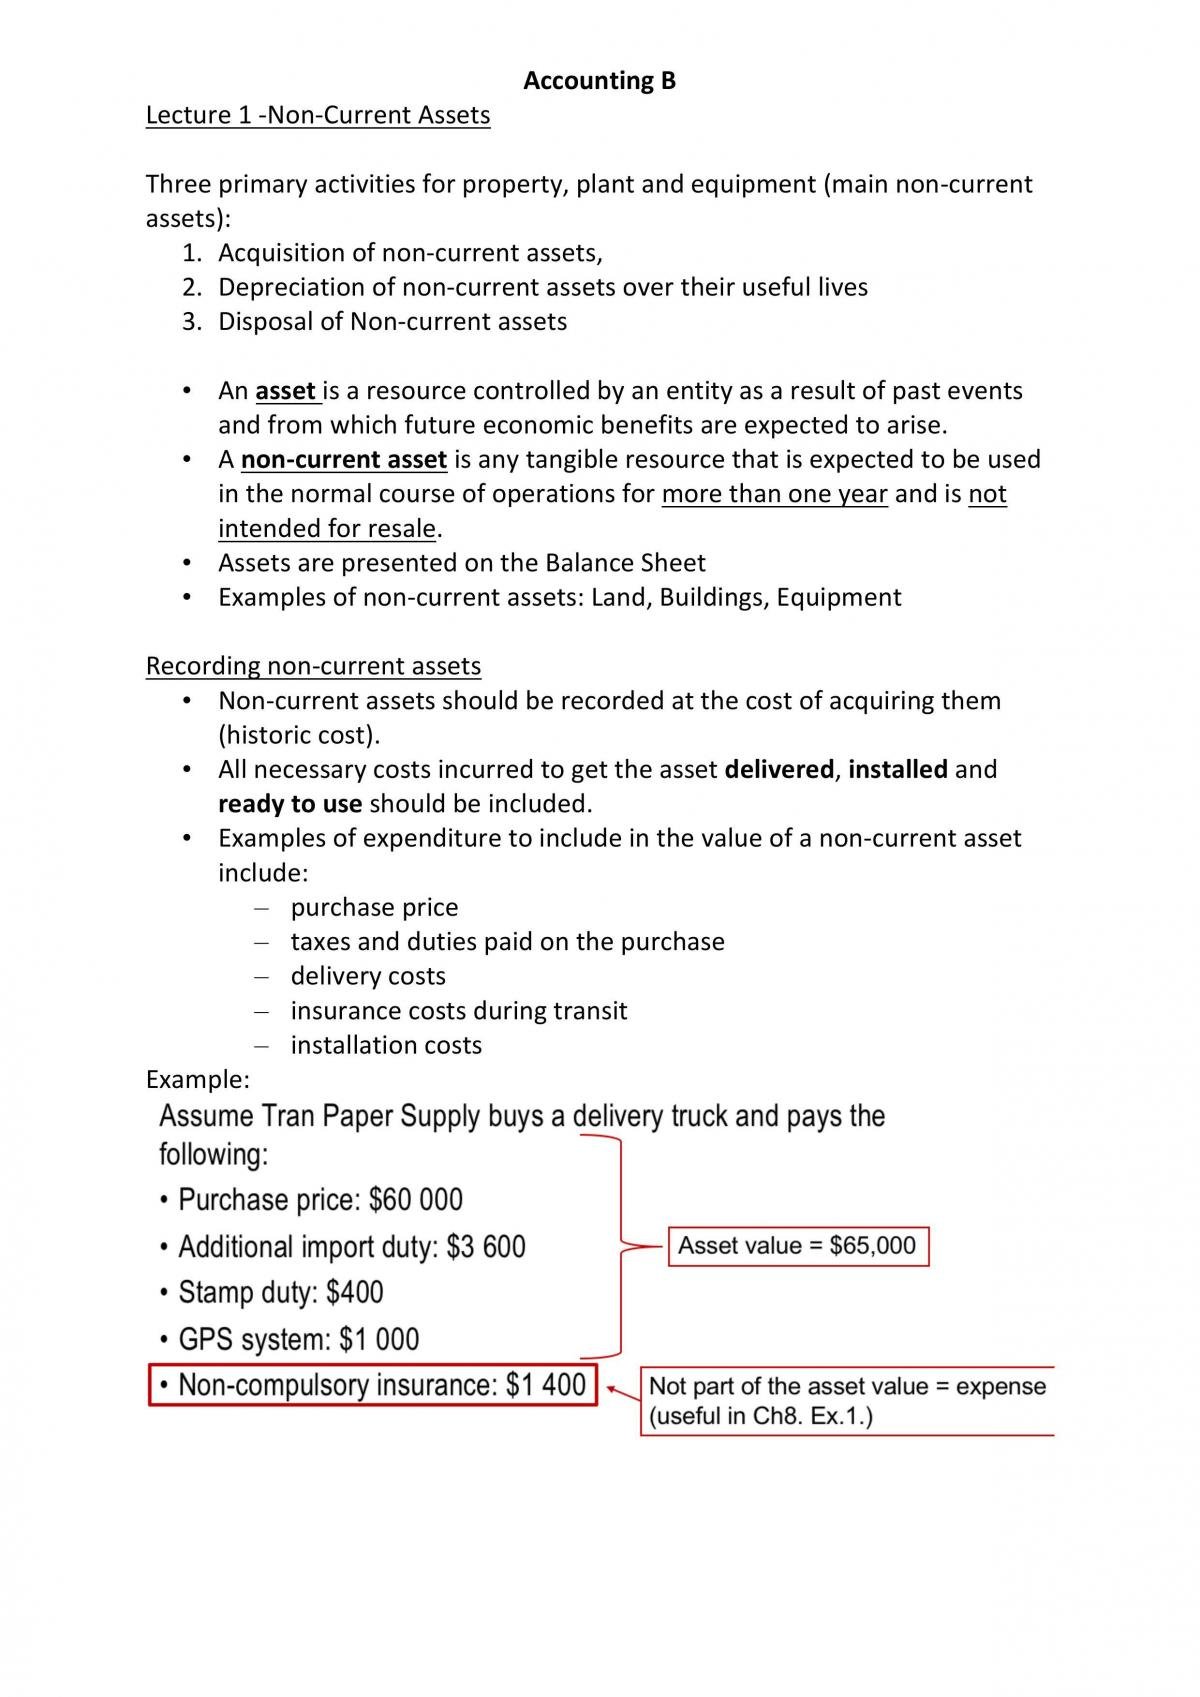 Accounting B Notes - Weeks 1-5 - Page 1